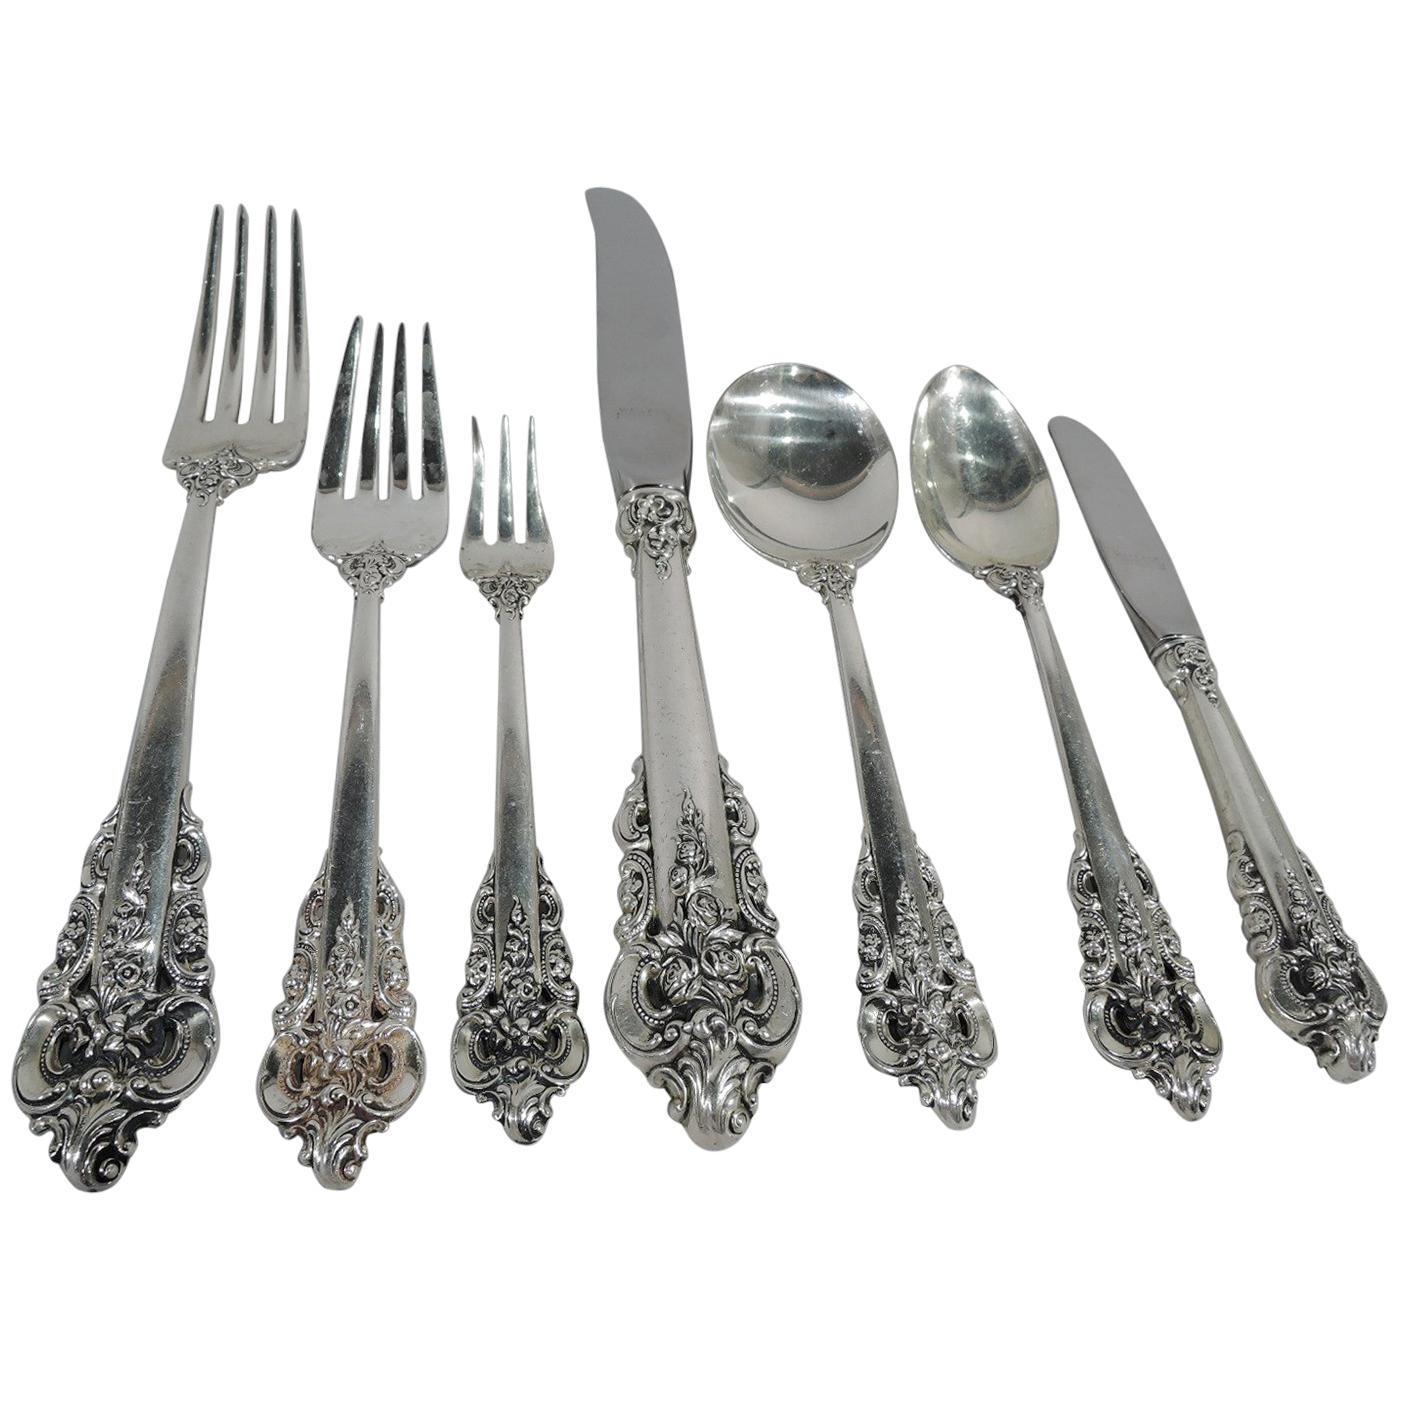 Wallace Grande Baroque Sterling Silver Dinner Set for 12 with 96 Pieces